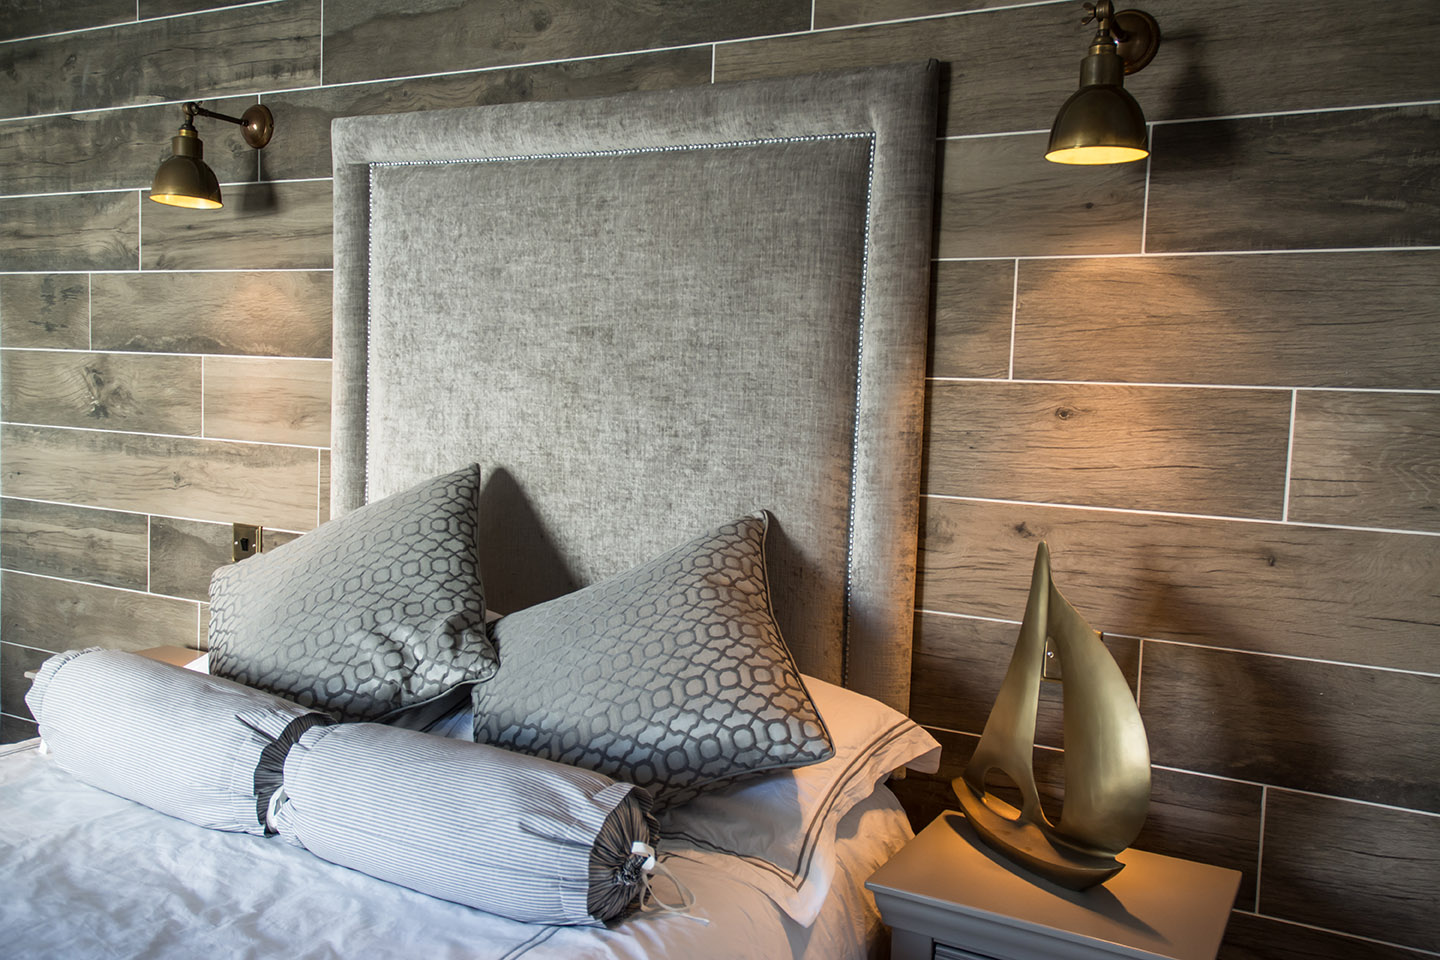 The Bayview Boutique Hotel, Kilkee. Design by Tess Stanford Interior Architects